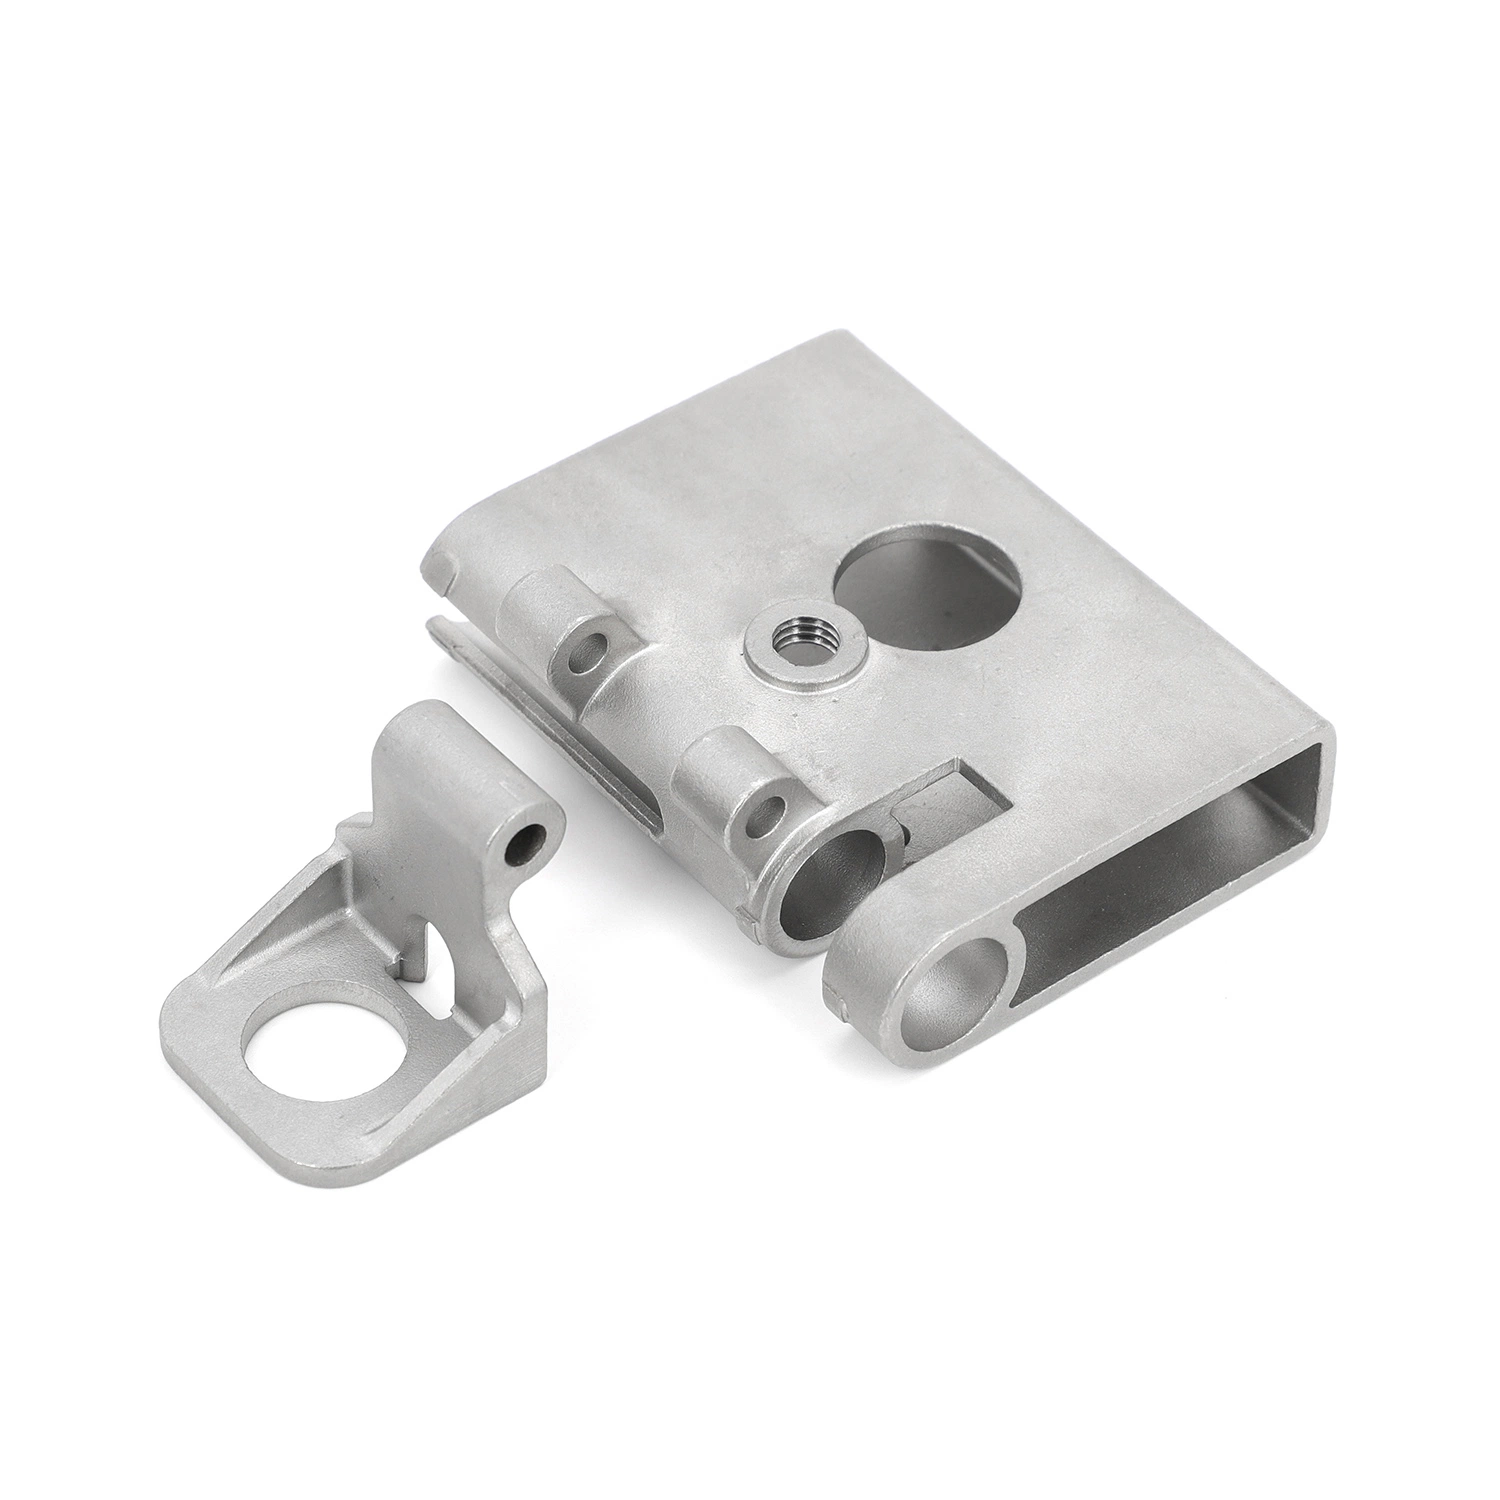 OEM Stainless Steel Investment Casting Engineering Construction Machinery Hardware